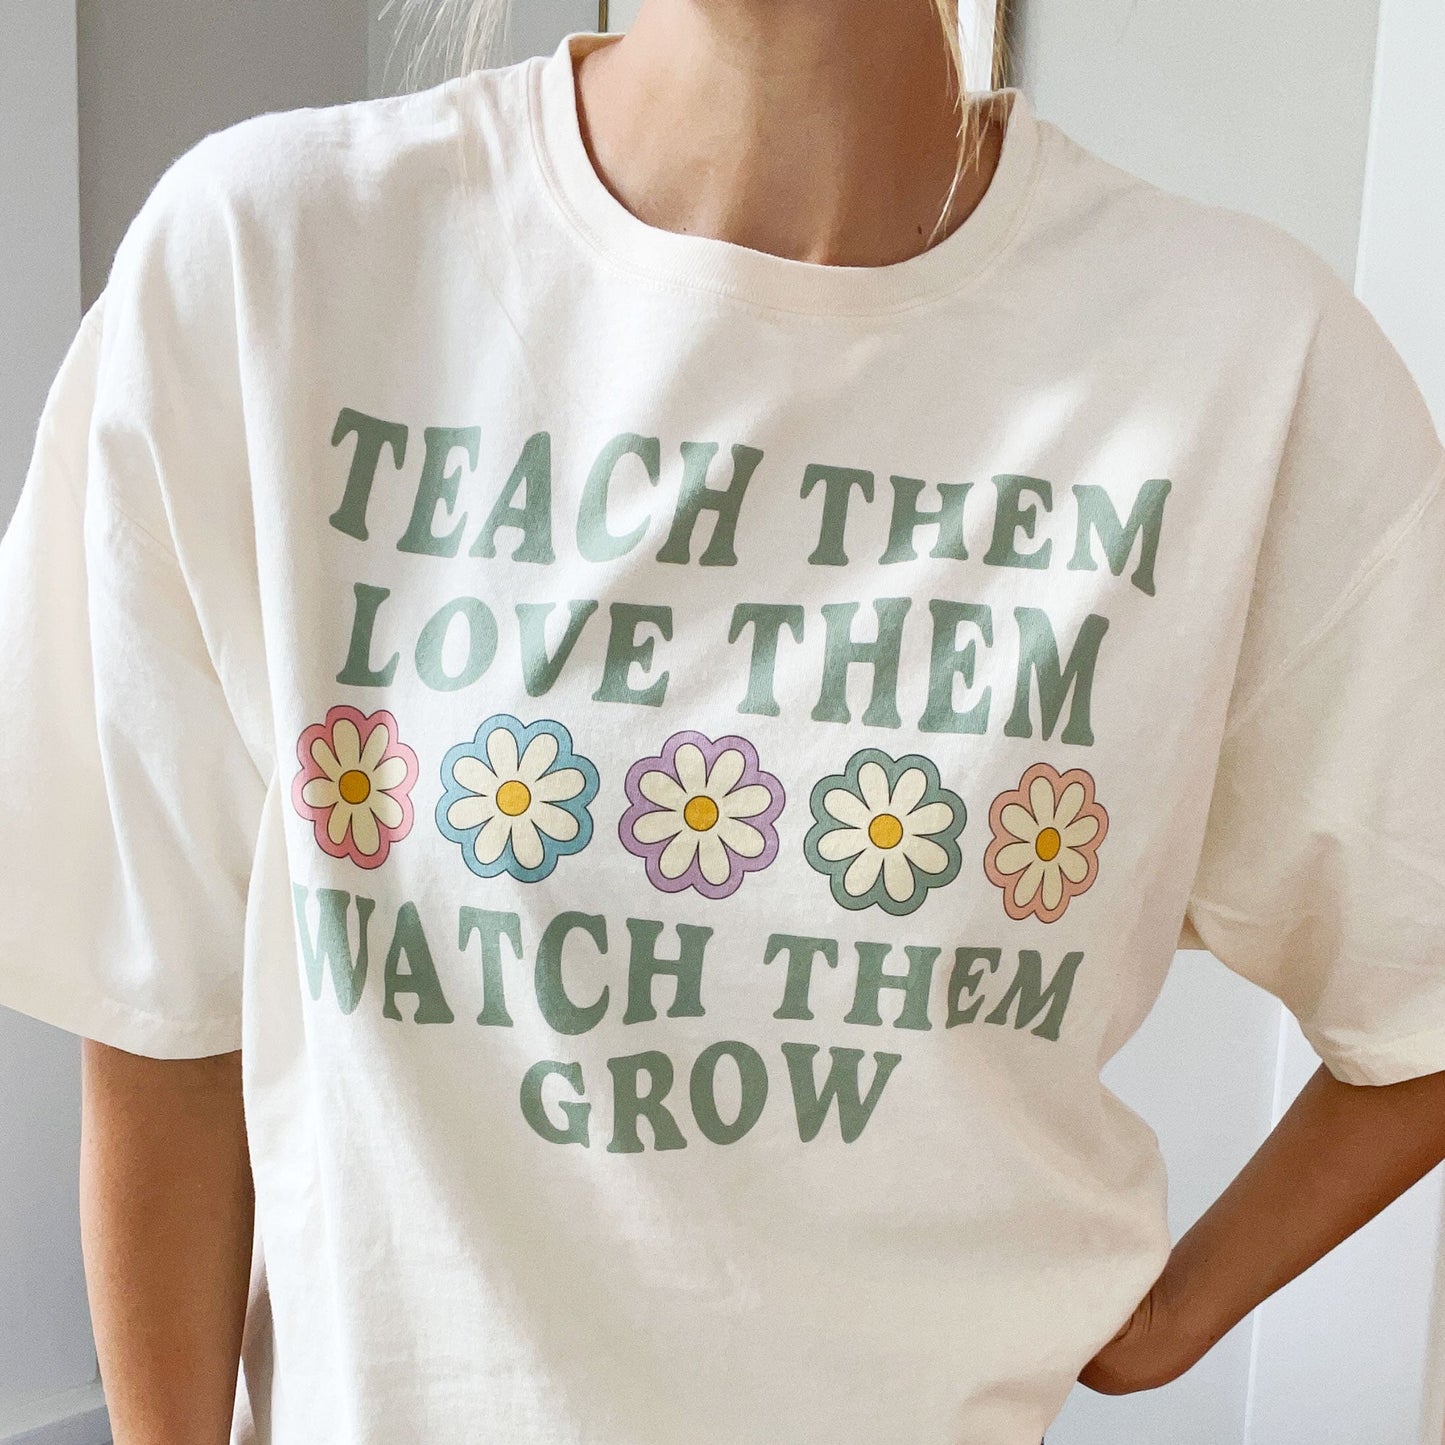 tshirt with a teach them love them watch them grow print with daisies